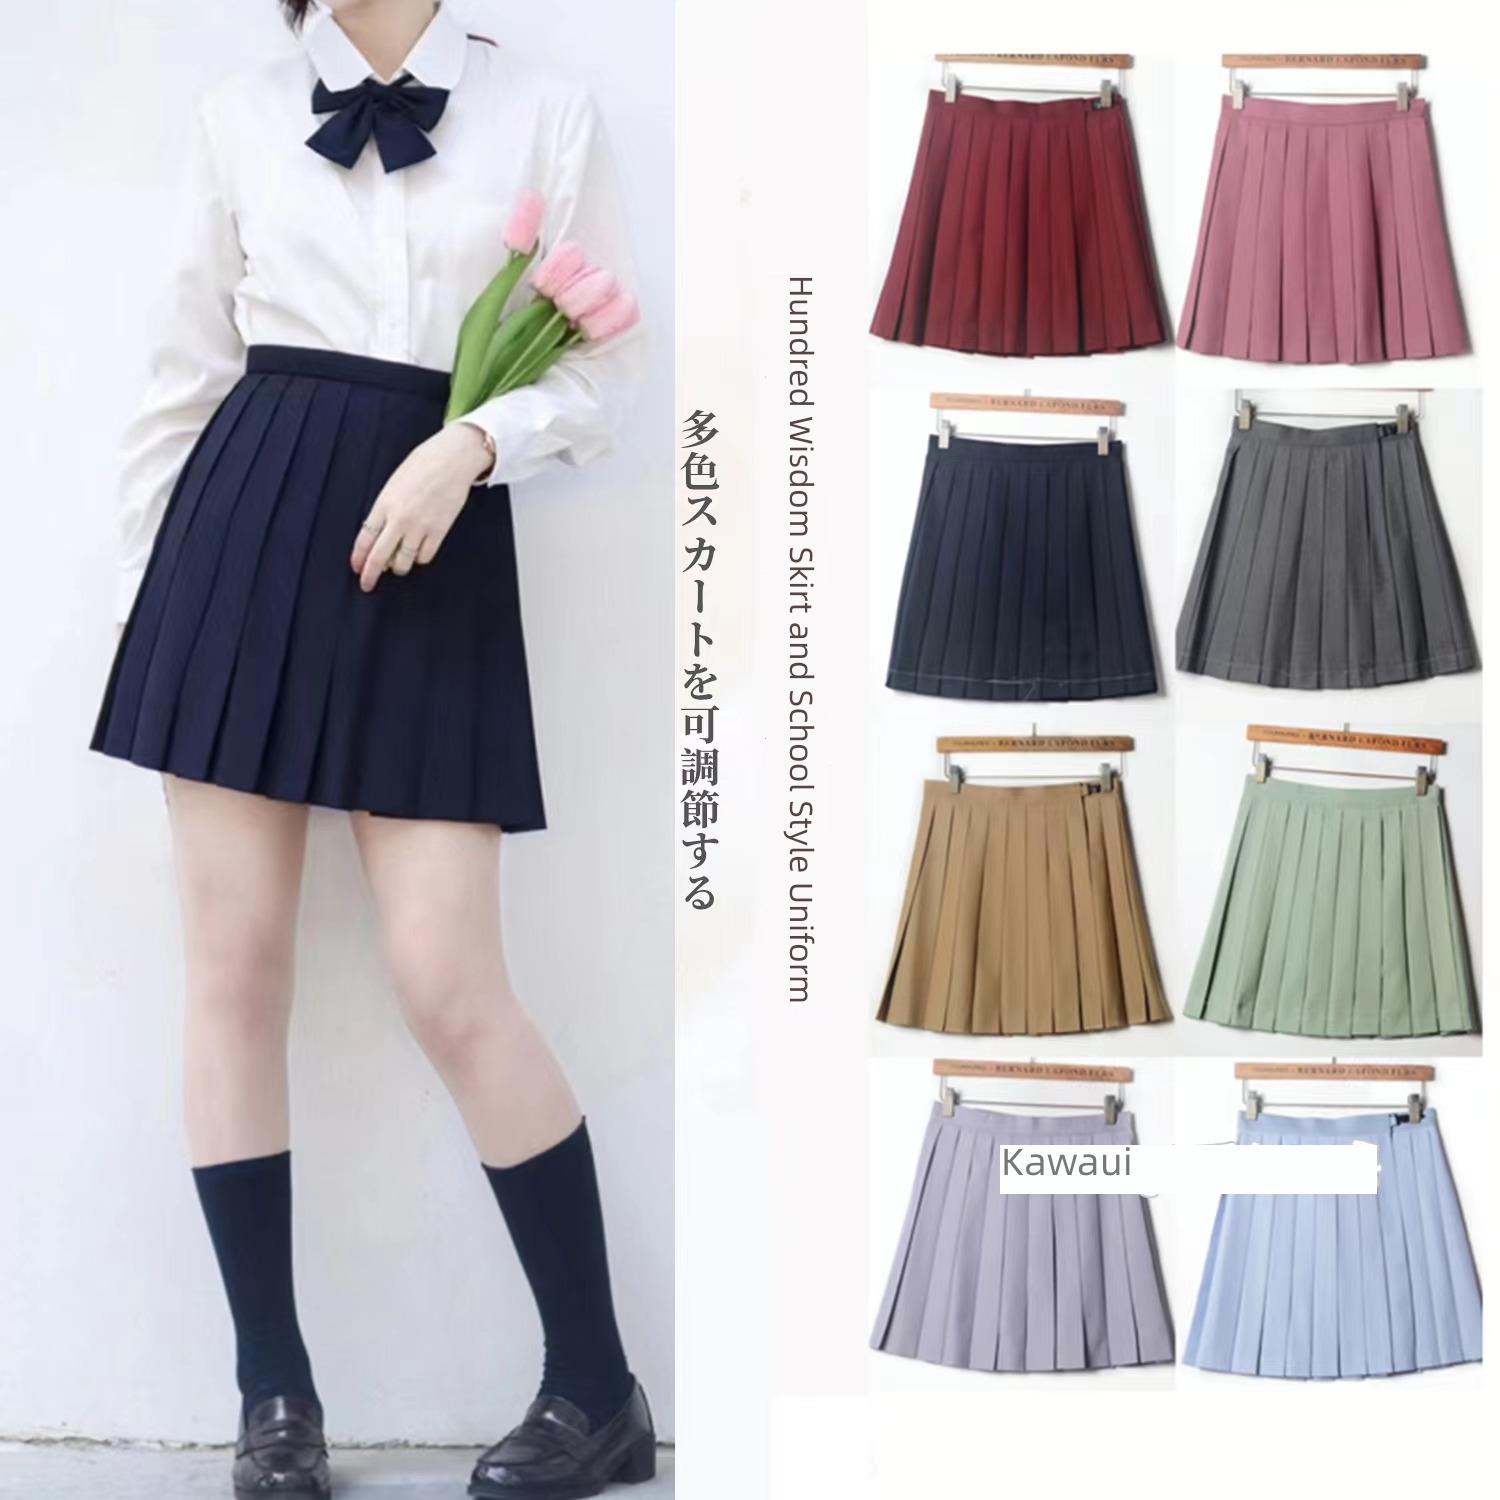 JK solar system Top students Sailor suit School supply Pleated skirt